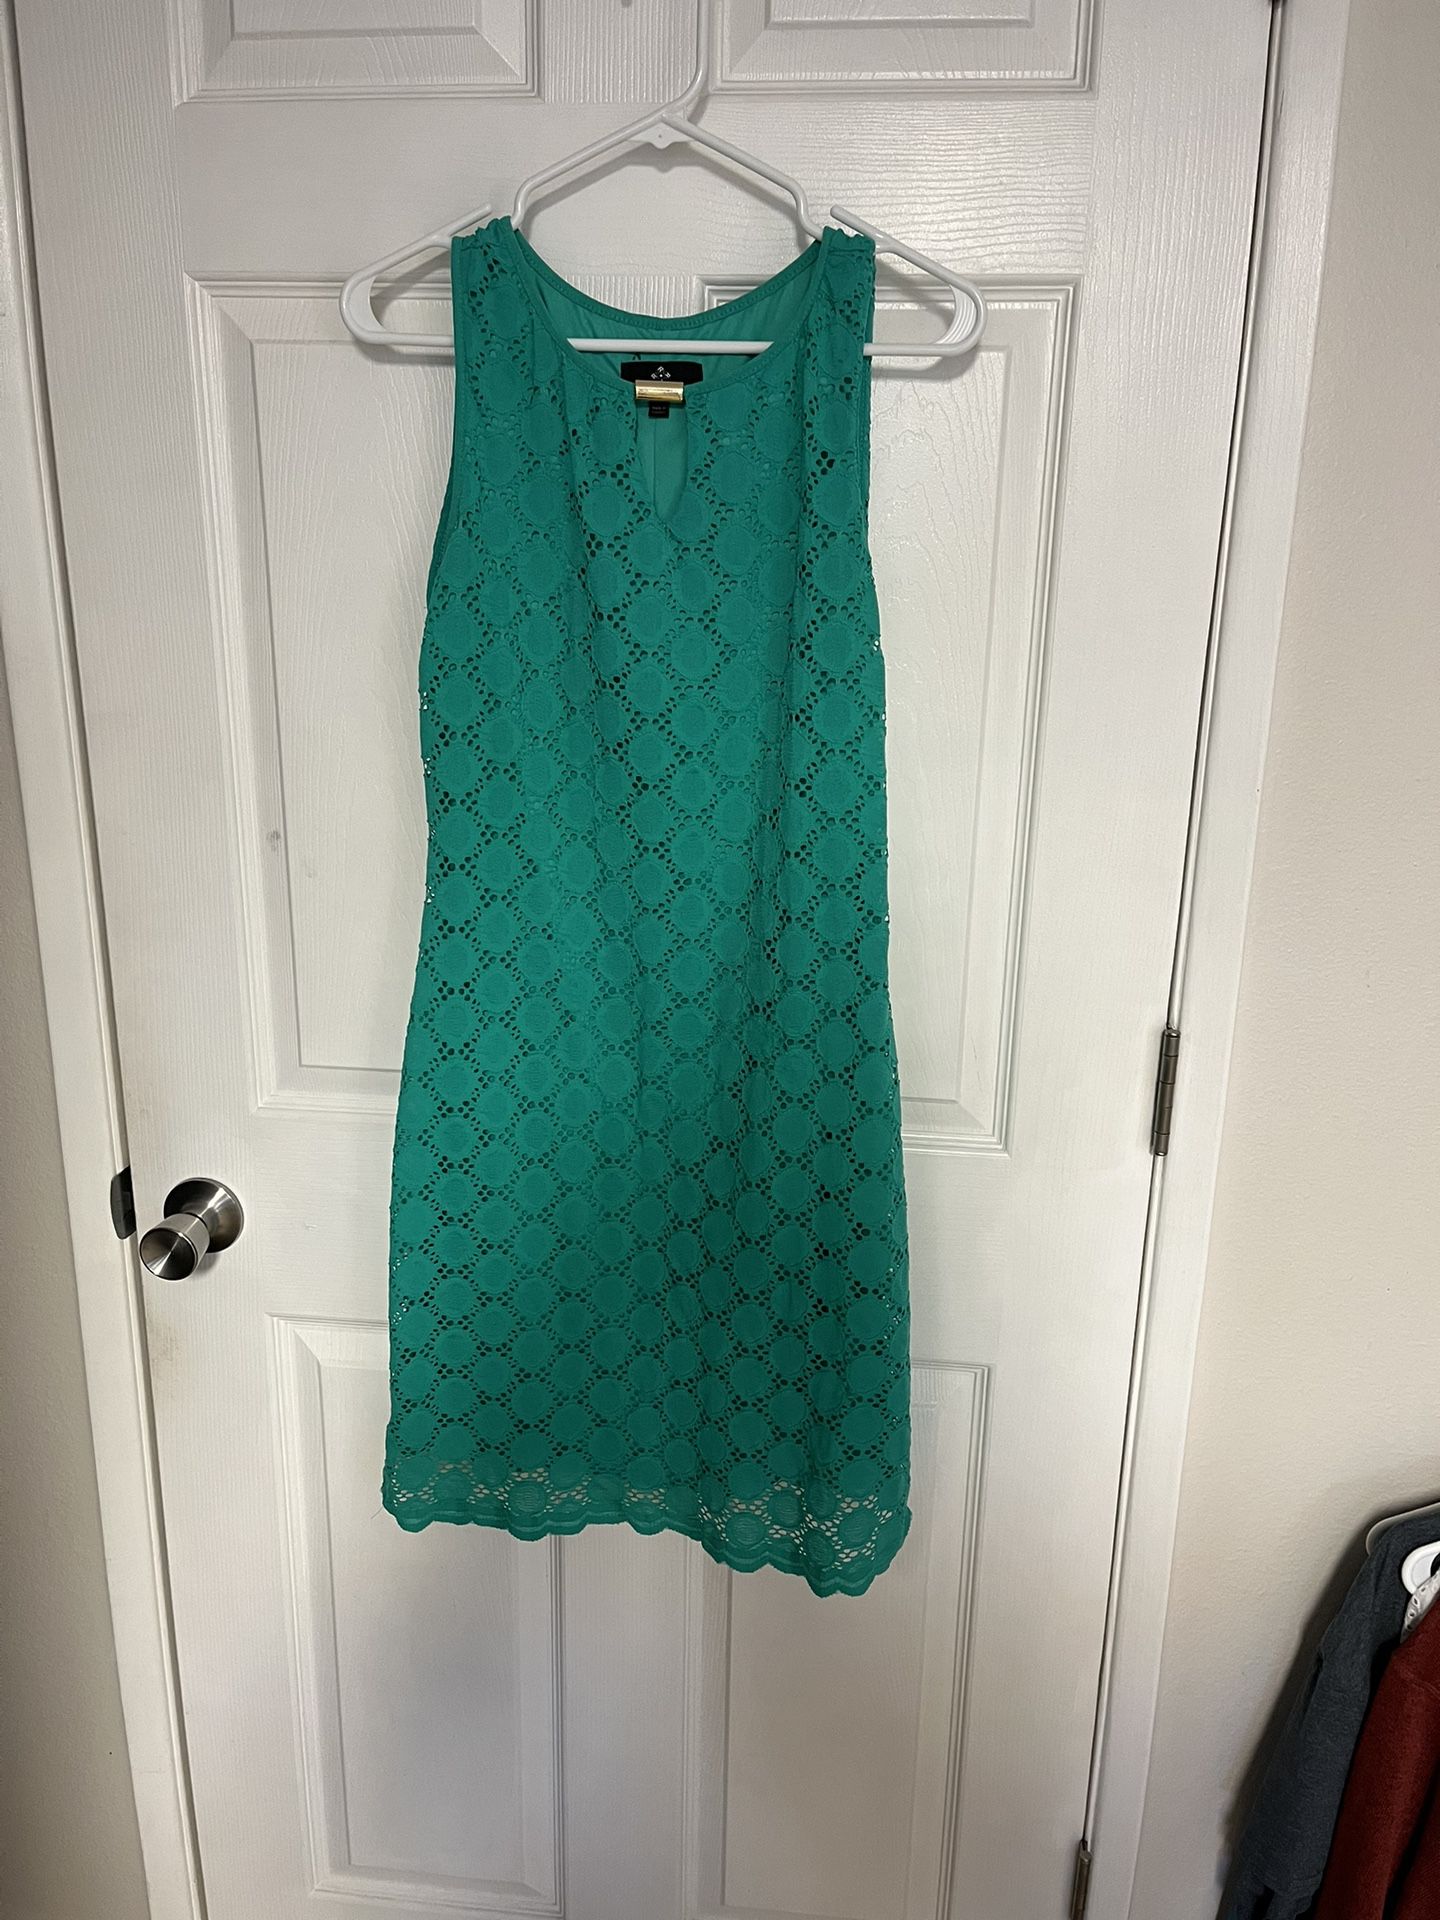 Ronni Nicole Women’s size 10 dress teal green lace dots spring into summer 